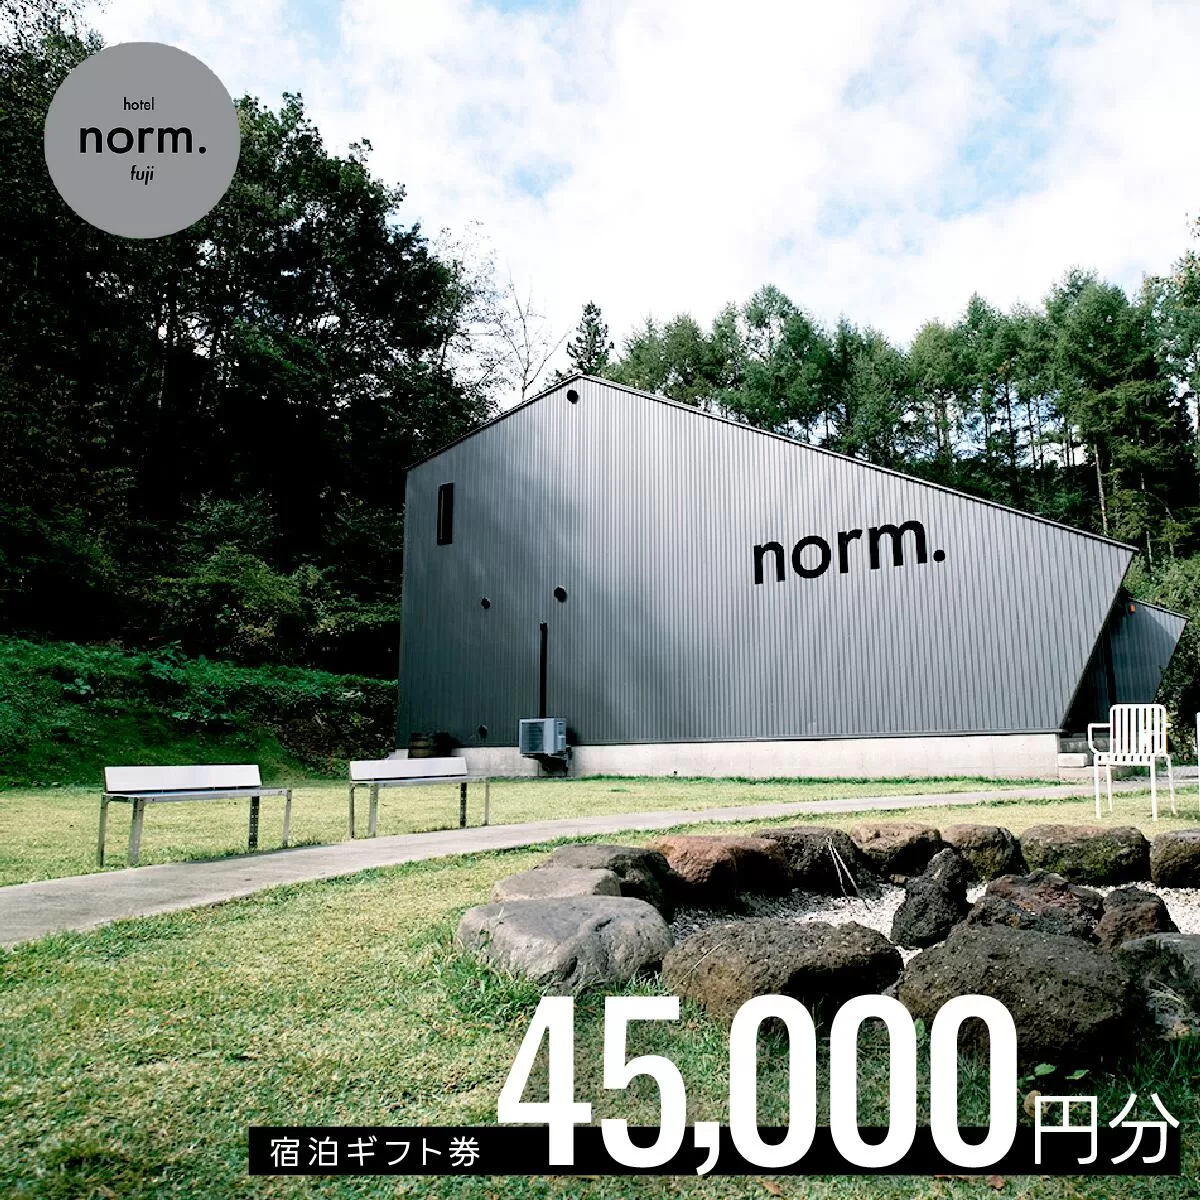 hotel norm. fuji 宿泊ギフト券(45,000円分) FBL002